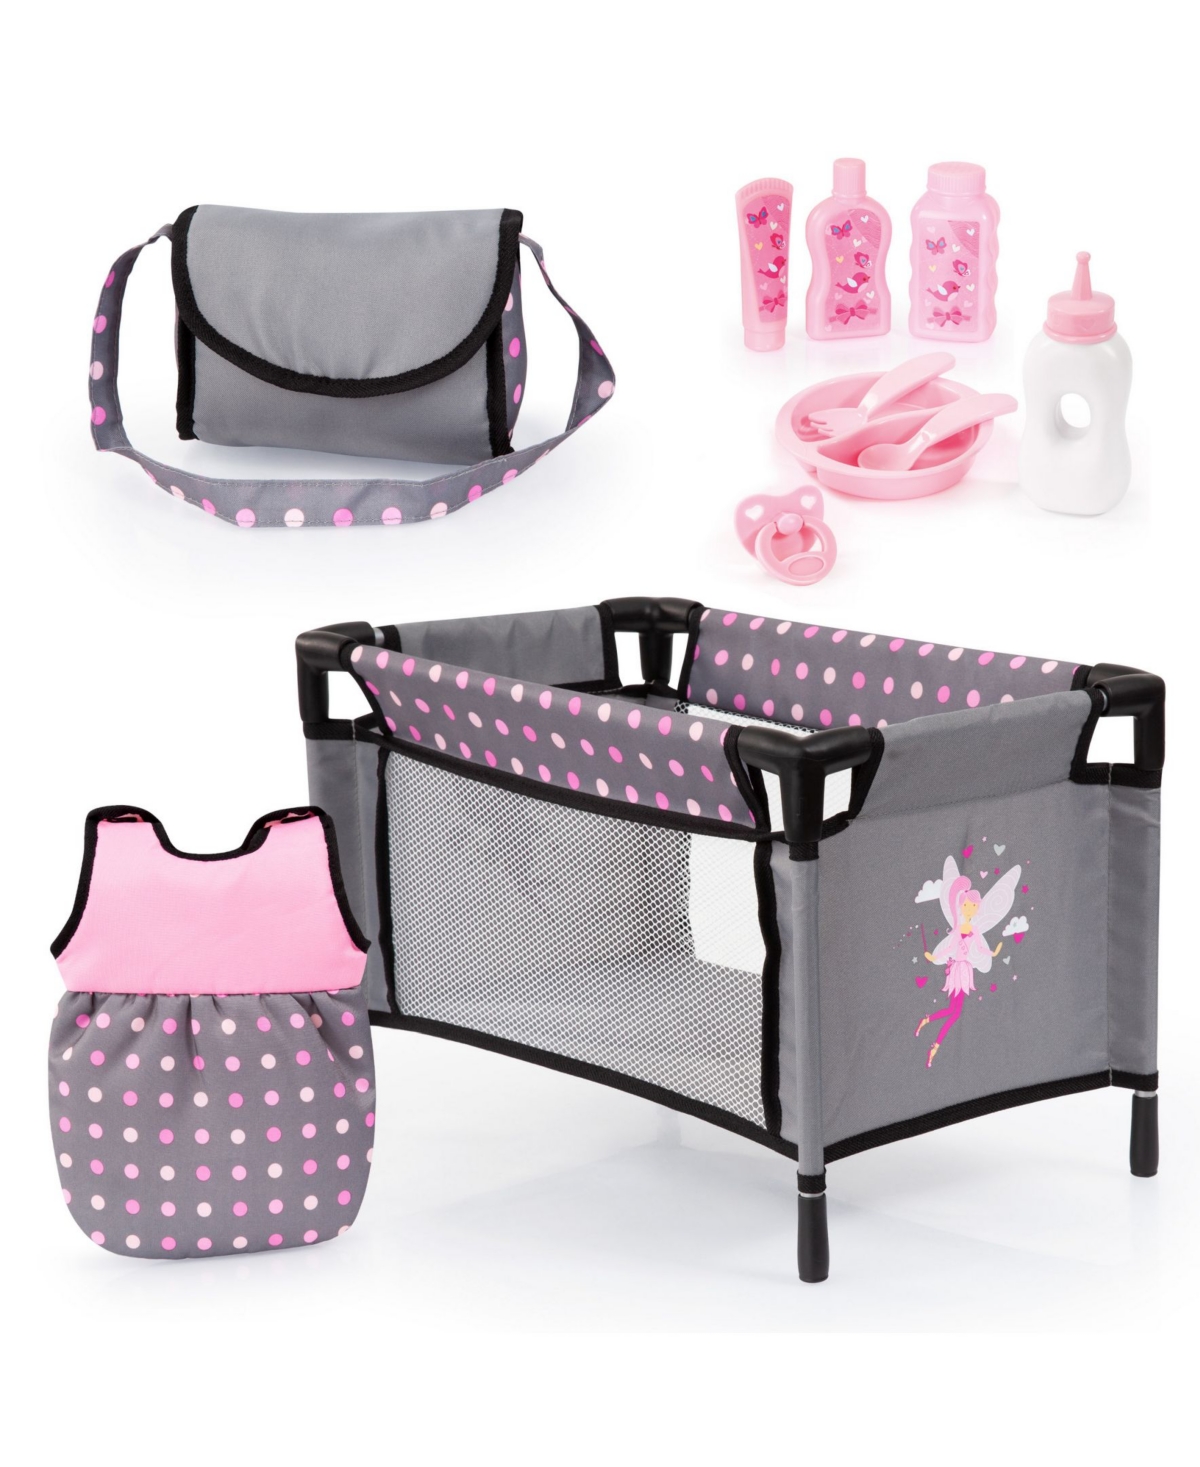 Redbox Baby Doll Travel Bed And Accessories Set In Multi